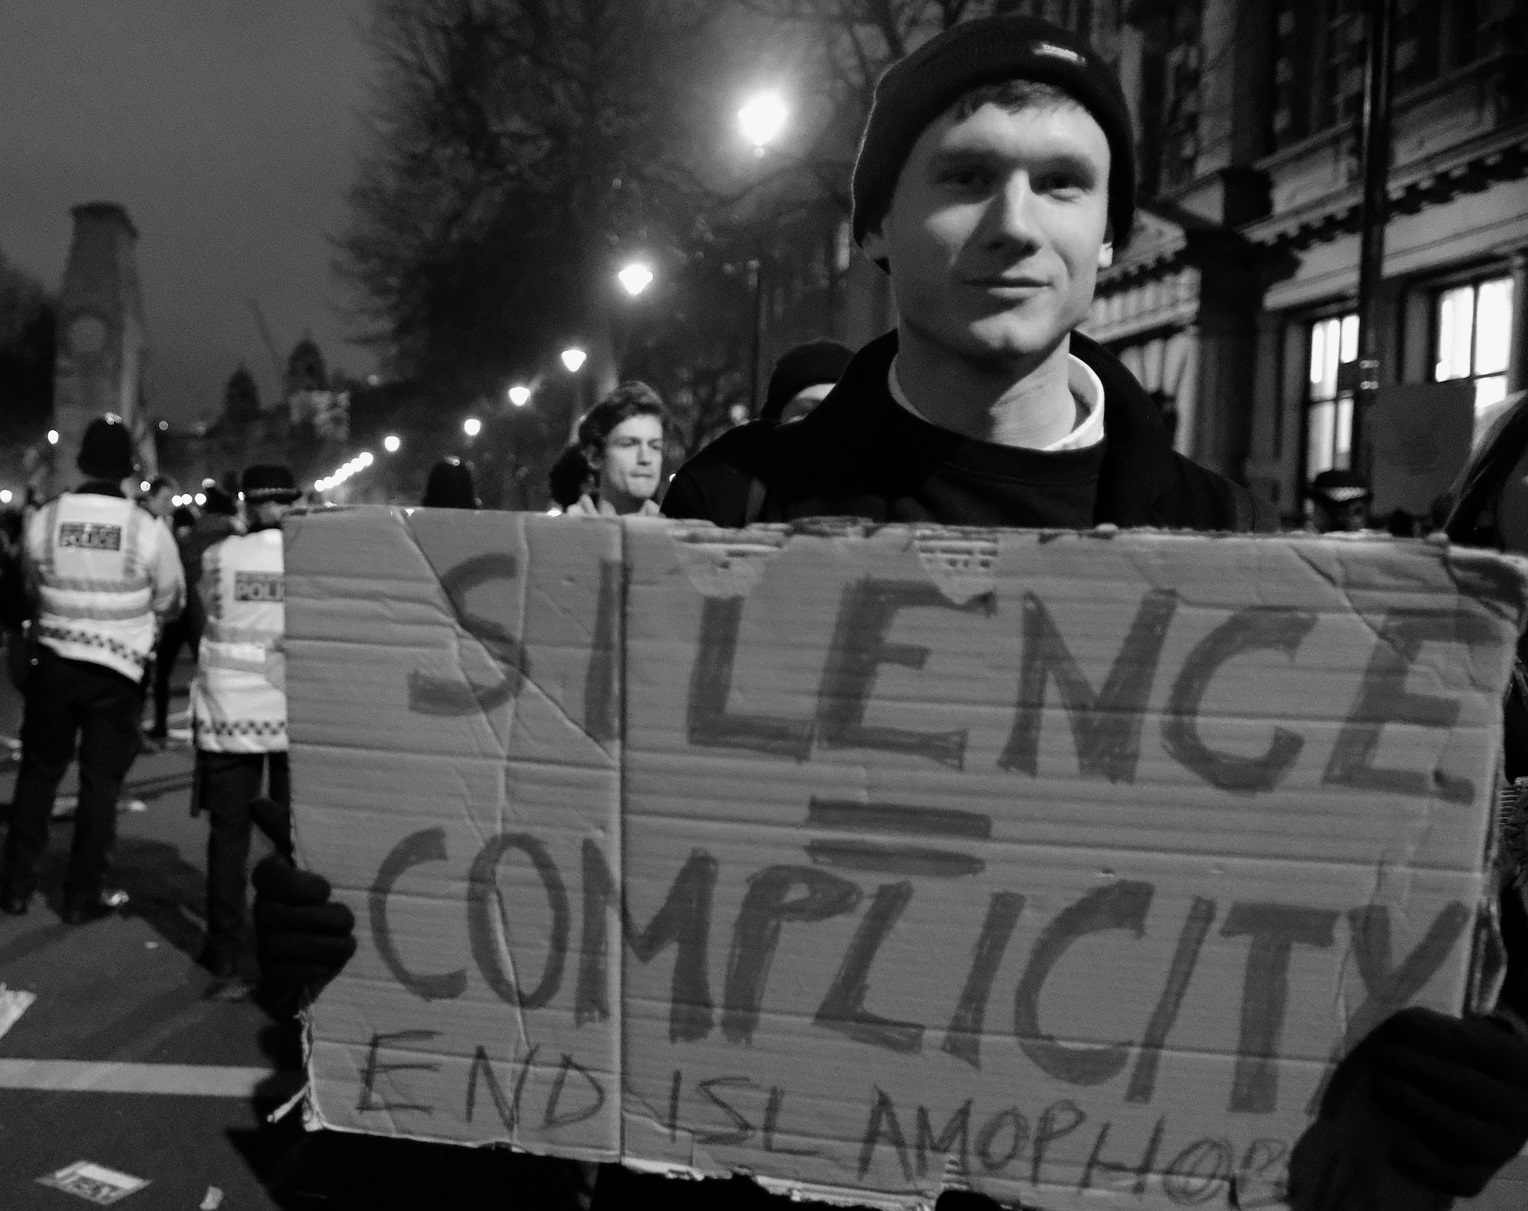 Reflections on #J28: Complicit Government